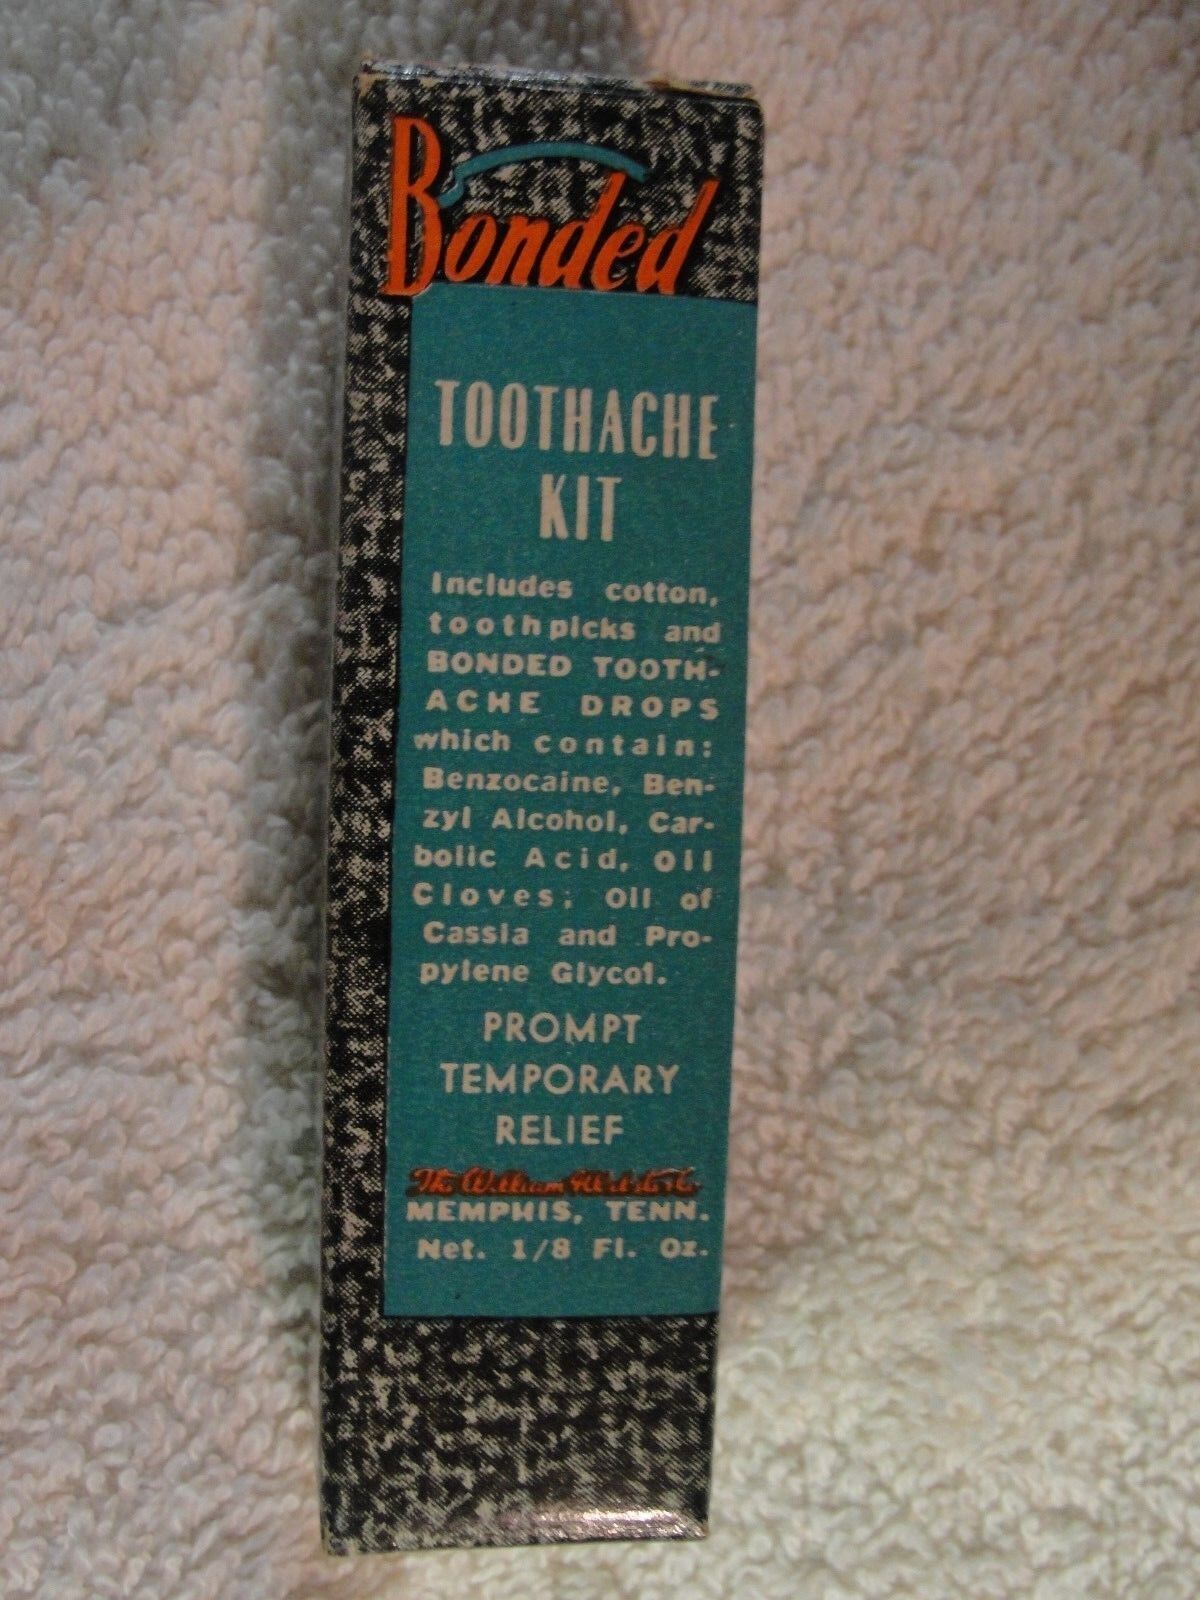 Vintage-Bonded Toothache Kit - For Temporary Relief of Tooth Pain